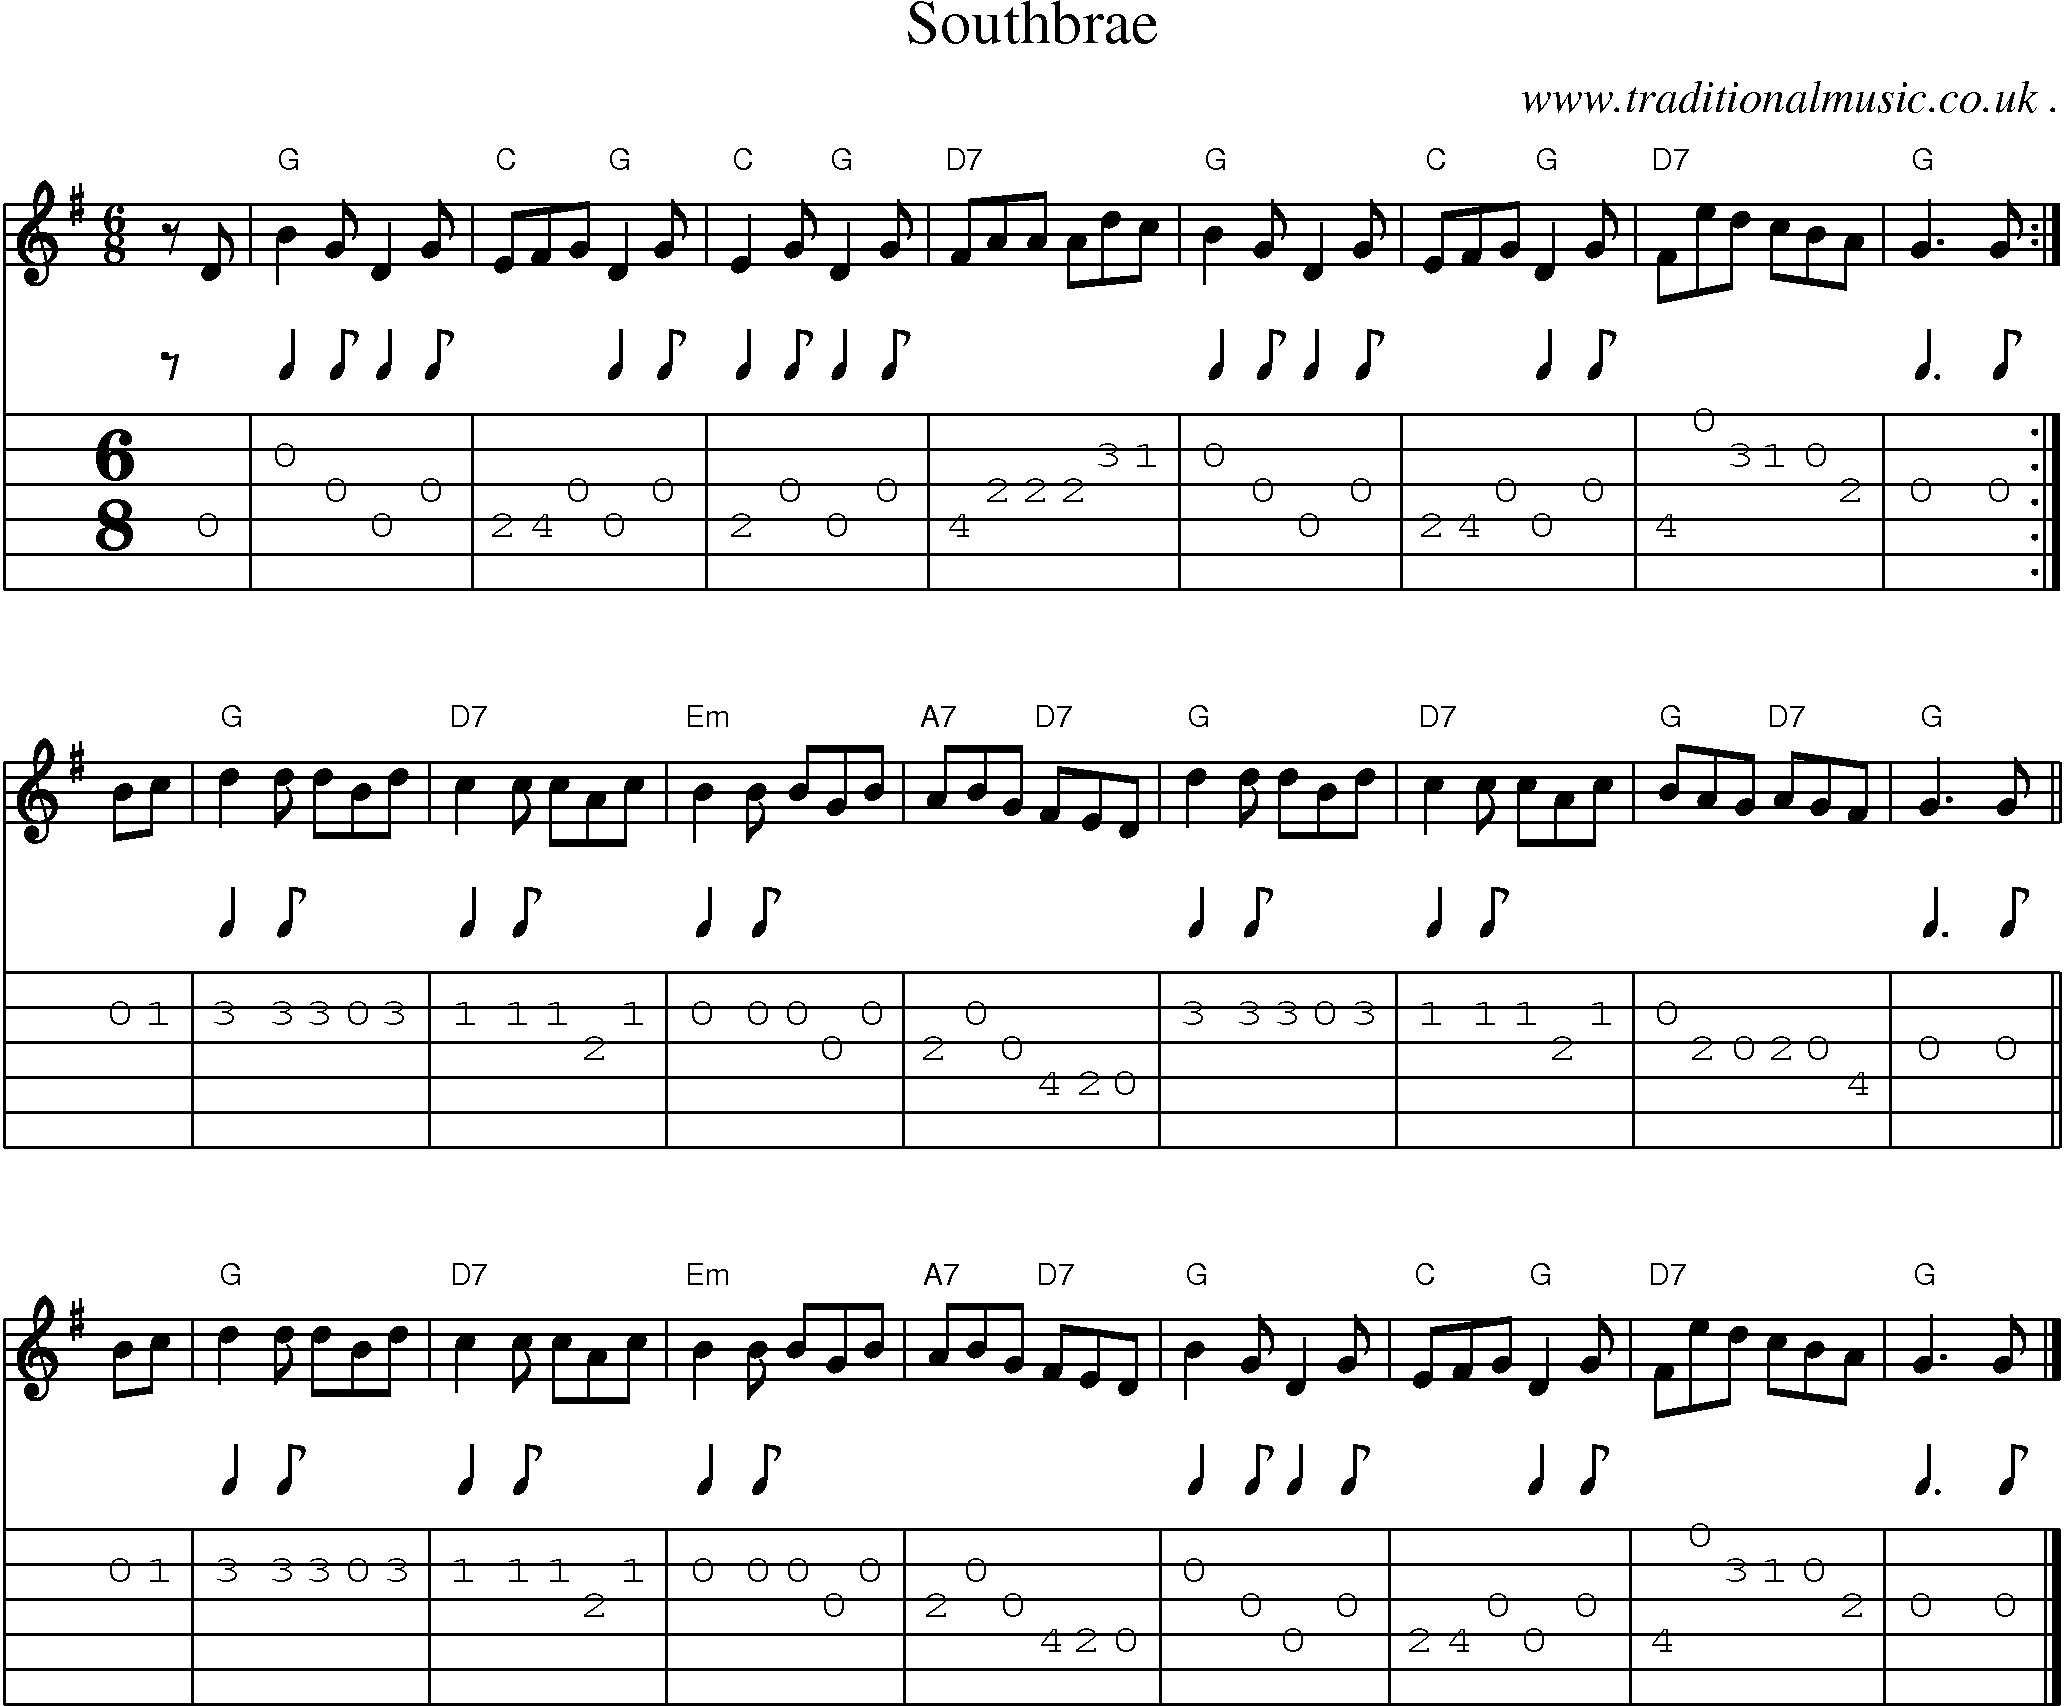 Sheet-music  score, Chords and Guitar Tabs for Southbrae